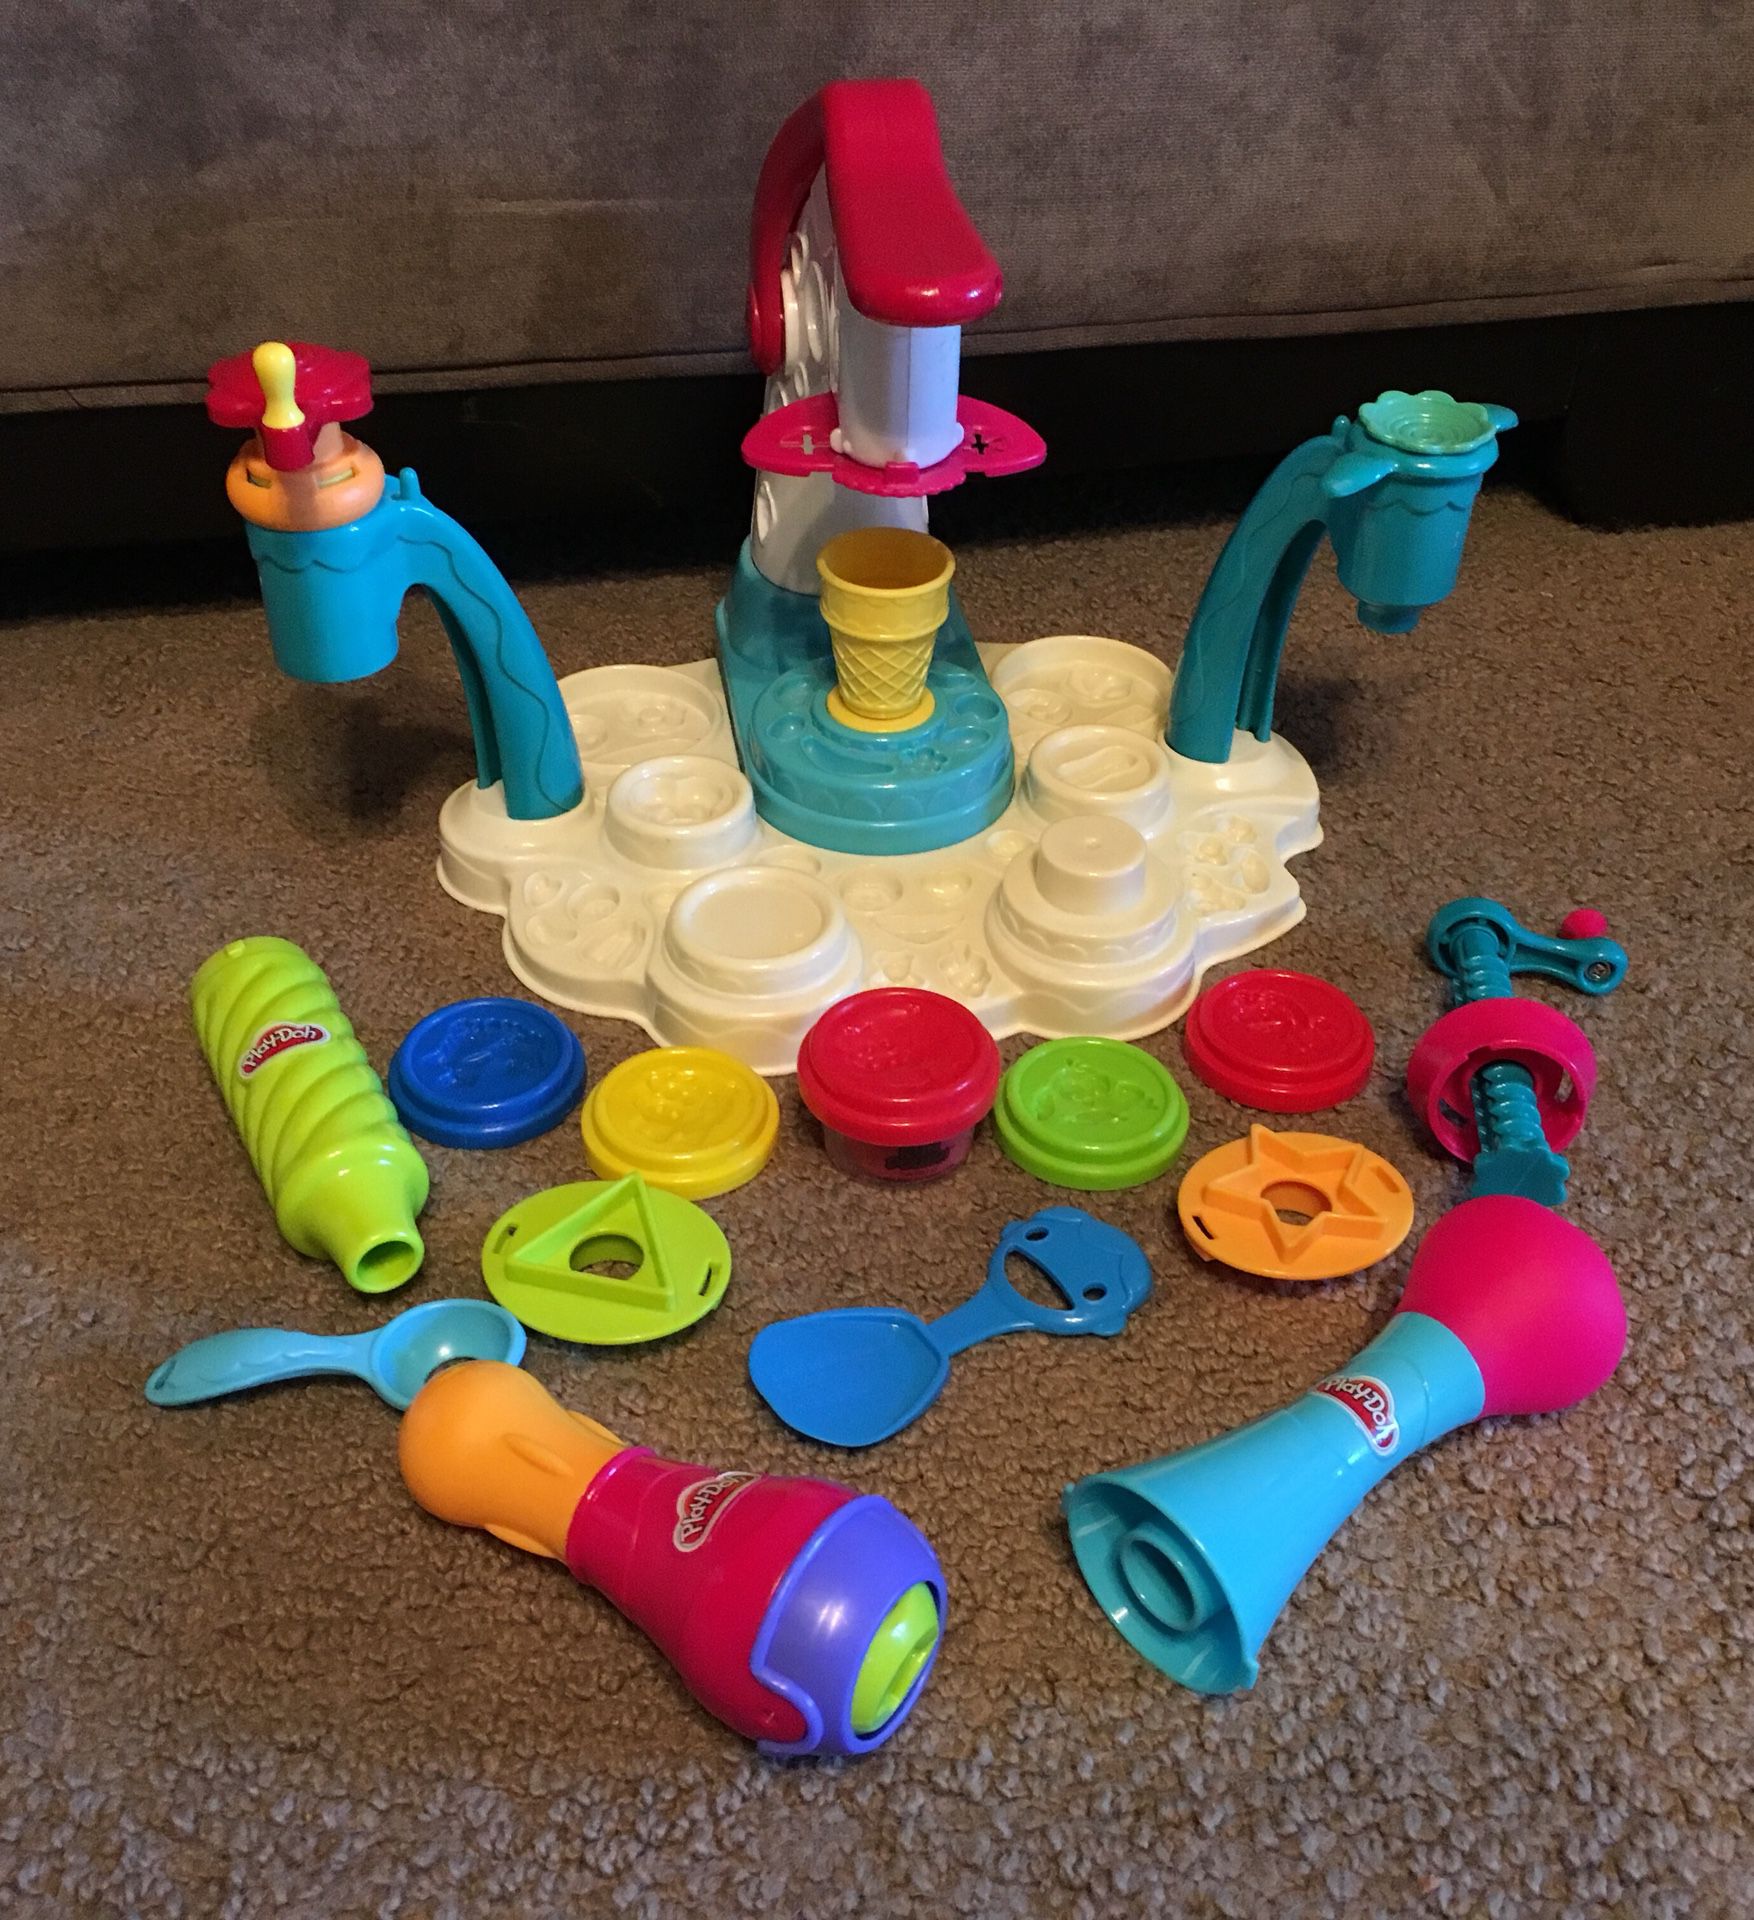 Play-Doh Accessories for Sale in Irwindale, CA - OfferUp